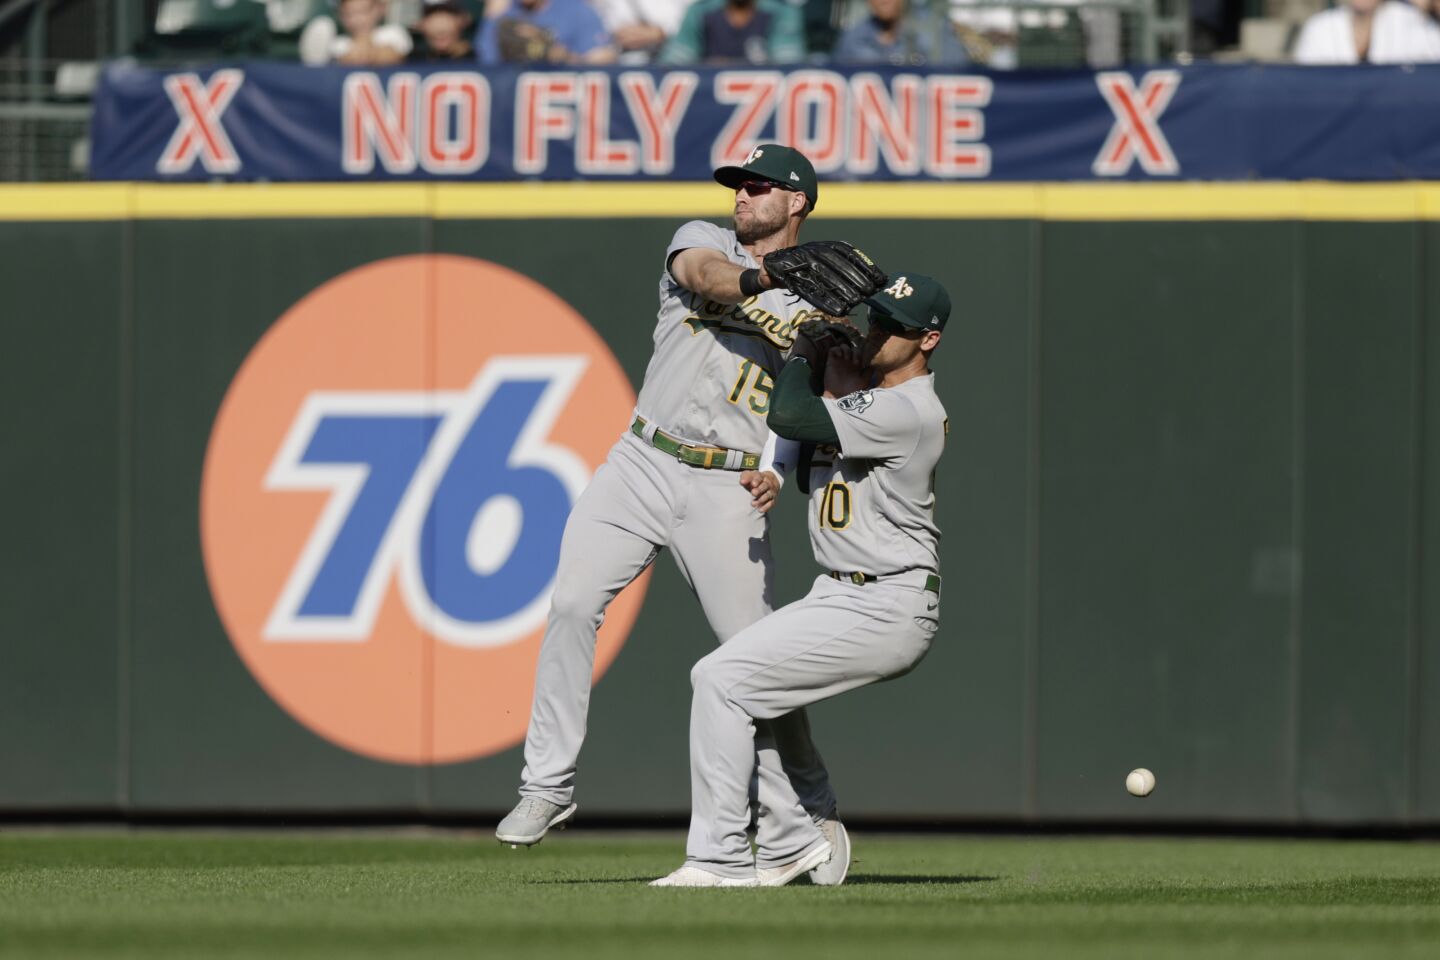 29 | Oakland Athletics (57-102; LW: 29)100 watch: Before this year’s fire sale, the A’s hadn’t suffered a 100-loss season since losing 108 in 1979.